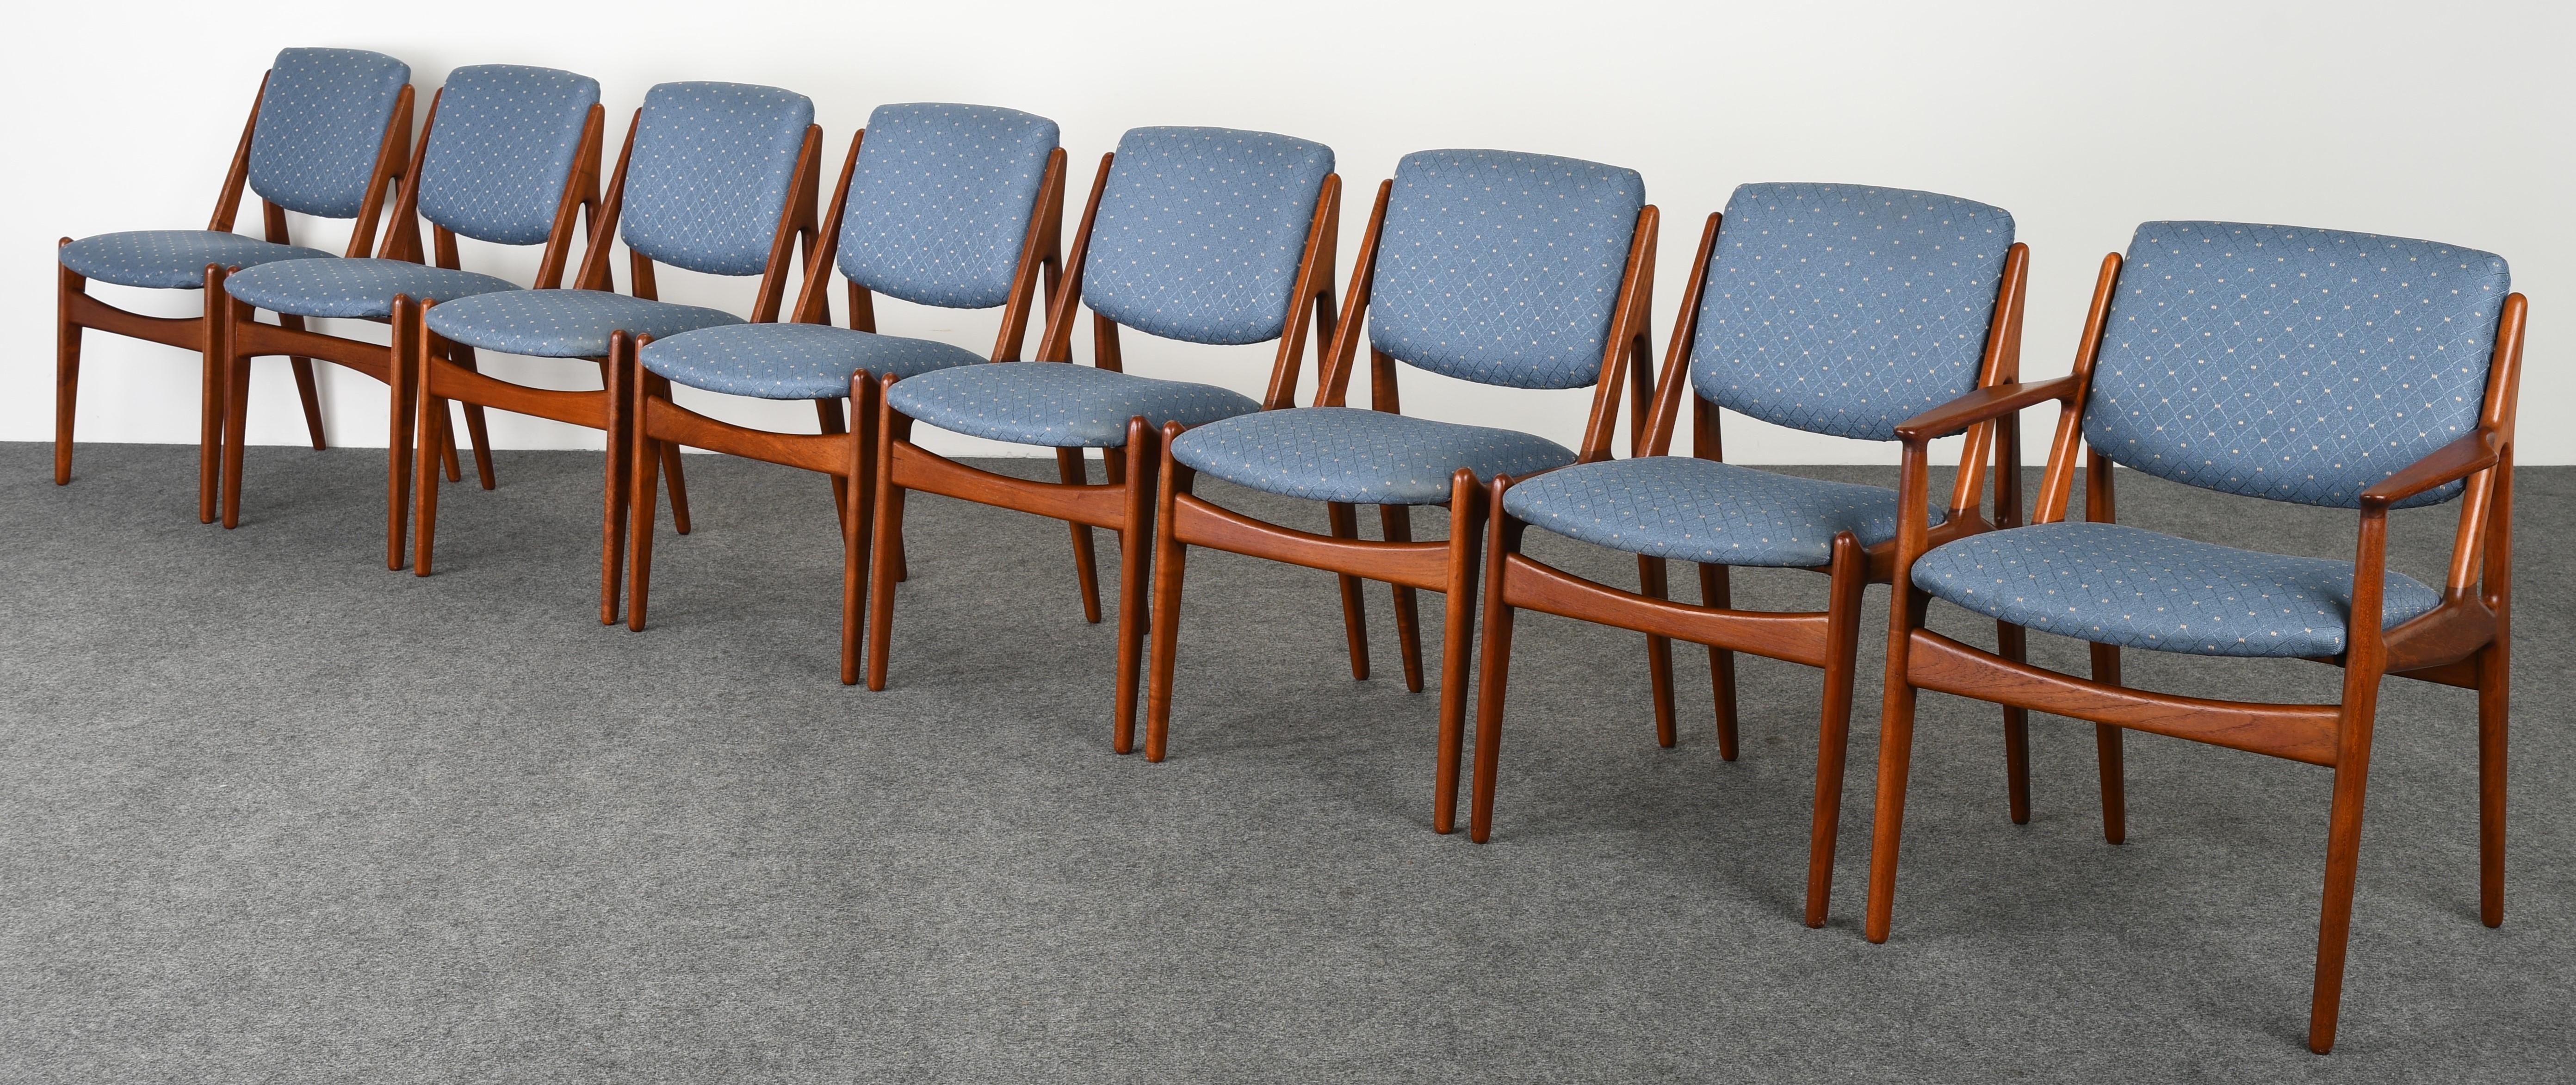 A set of eight sleek Mid-Century Modern dining chairs designed by Arne Vodder. This Danish Modern set of chairs includes seven side chairs and one armchair. The chairs are structurally sound and are in good condition. New upholstery suggested but